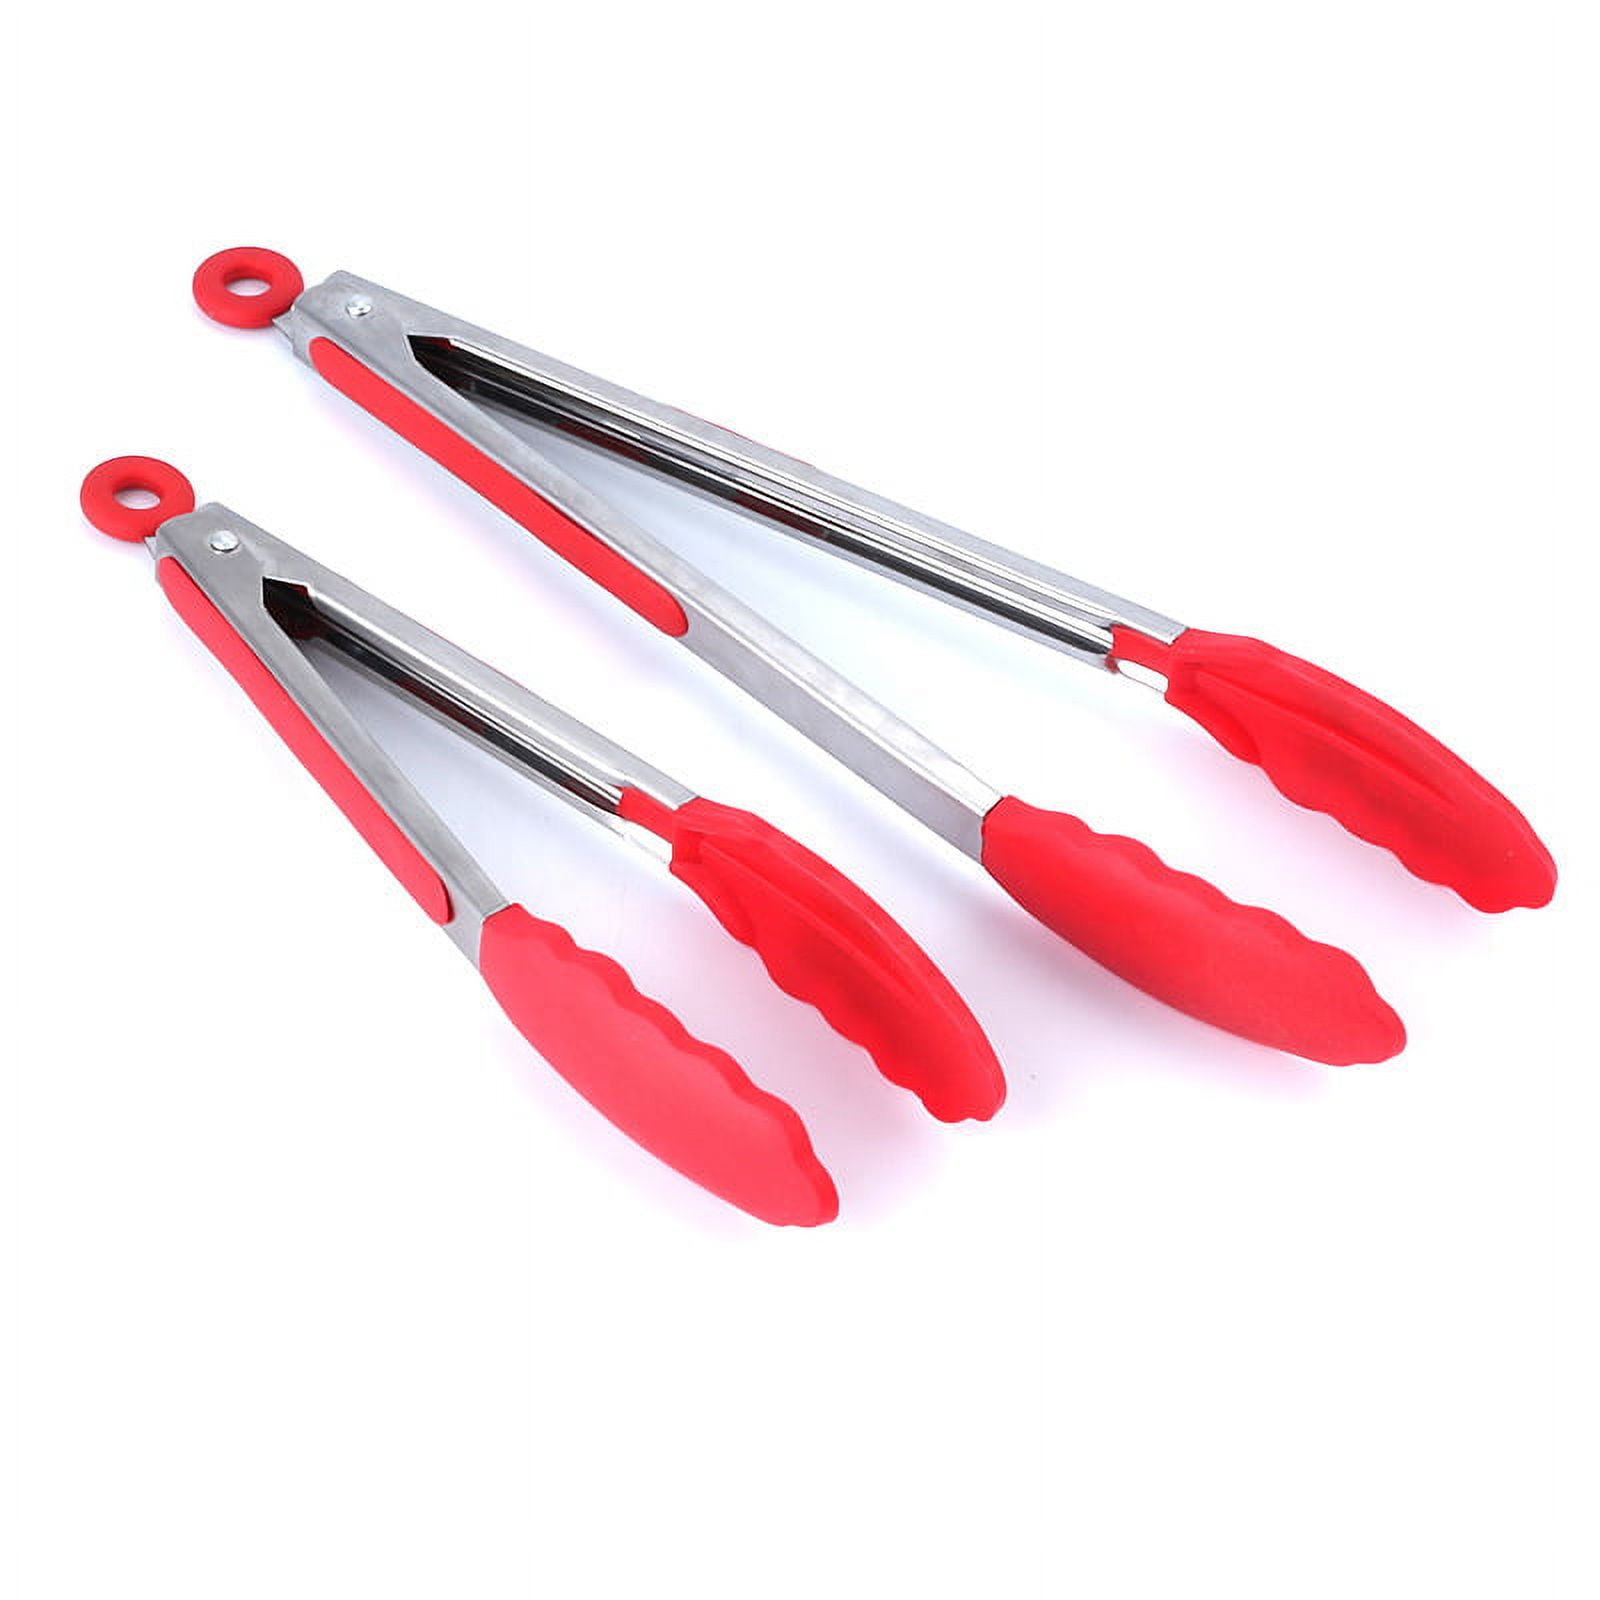 Uxcell Kitchen Tongs Silicone Tip Stainless Steel Lock Tongs Burgundy 9 